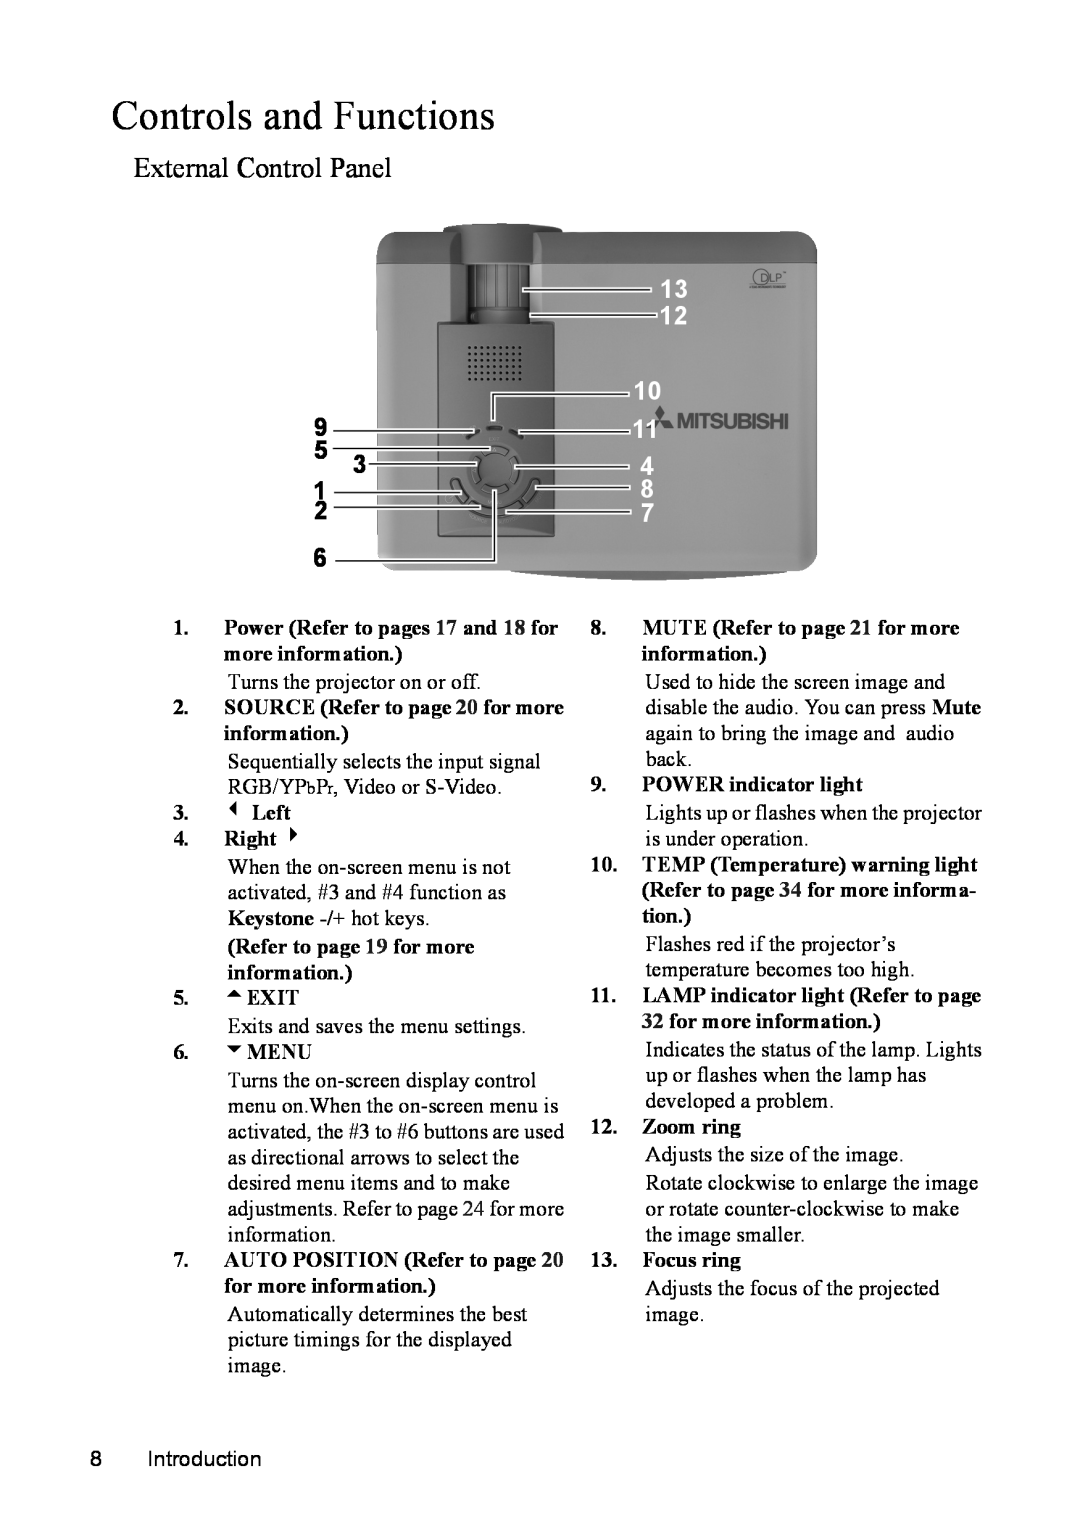 Mitsubishi Electronics SE2U Controls and Functions, External Control Panel, SOURCE Refer to page 20 for more information 